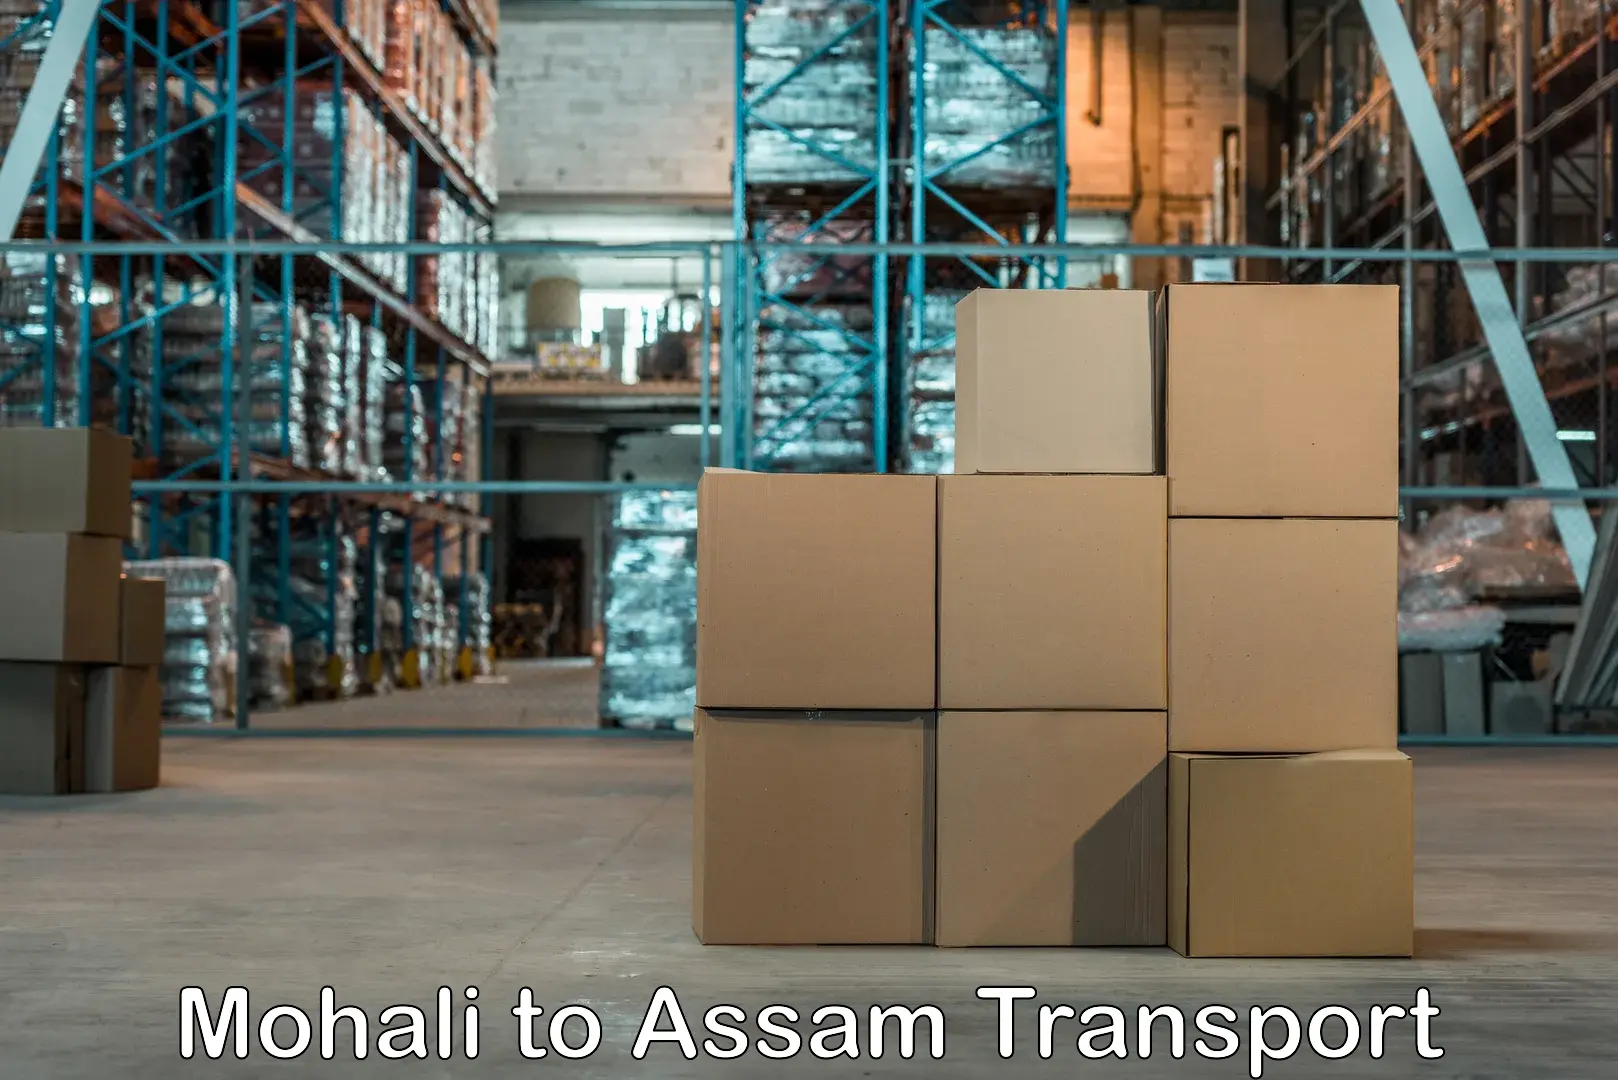 Daily transport service Mohali to Assam